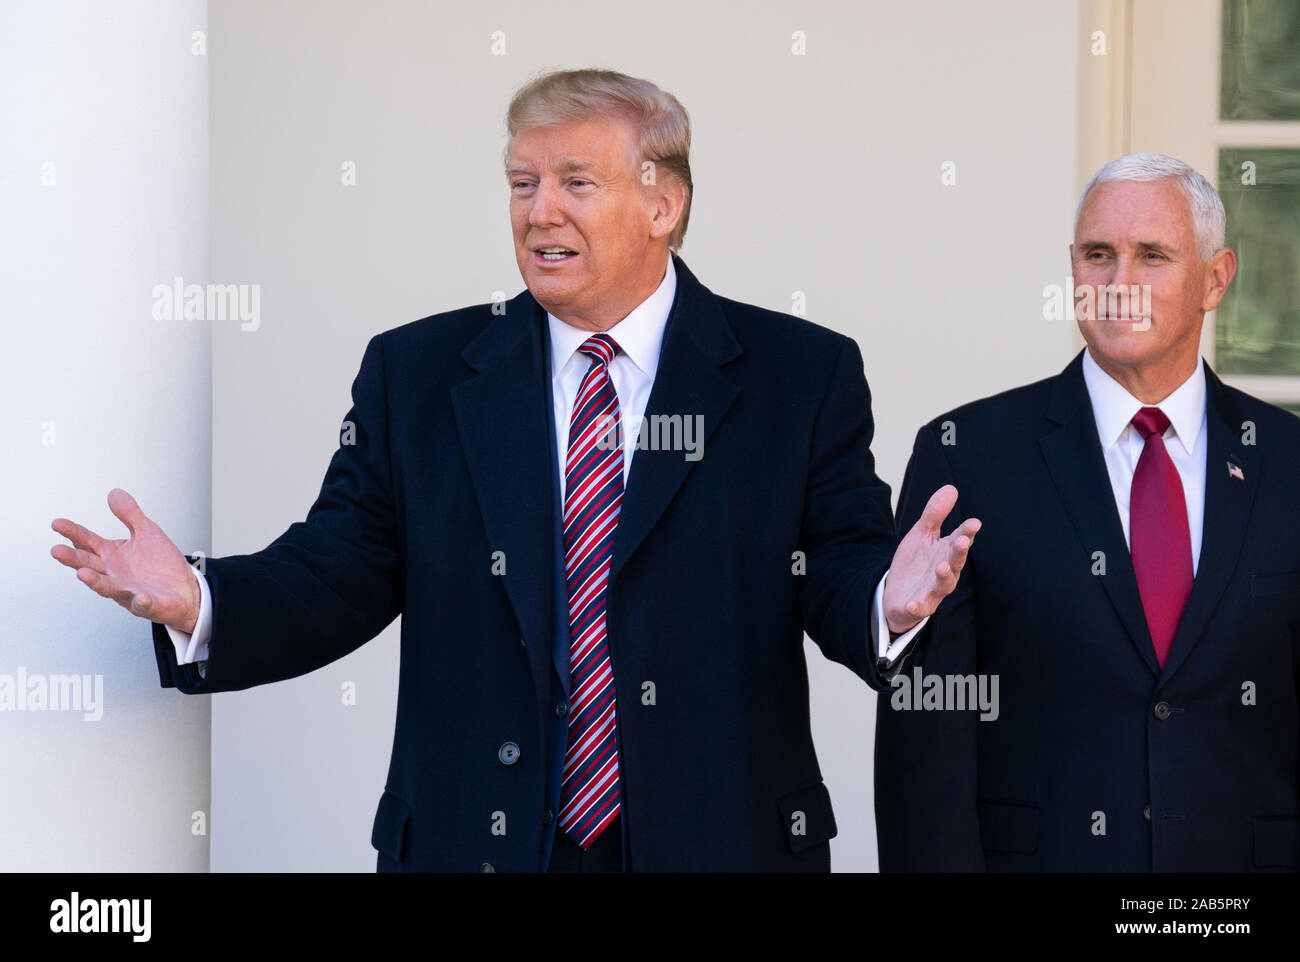 Washington, United States. 25th Nov, 2019. President Donald Trump, joined by Vice President Mike Pence, speaks about Conan the military working dog, at the White House in Washington, DC on November 25, 2019. The dog Conan assisted in the Baghdadi raid and was awarded a medal by President Trump. Photo by Kevin Dietsch/UPI Credit: UPI/Alamy Live News Stock Photo